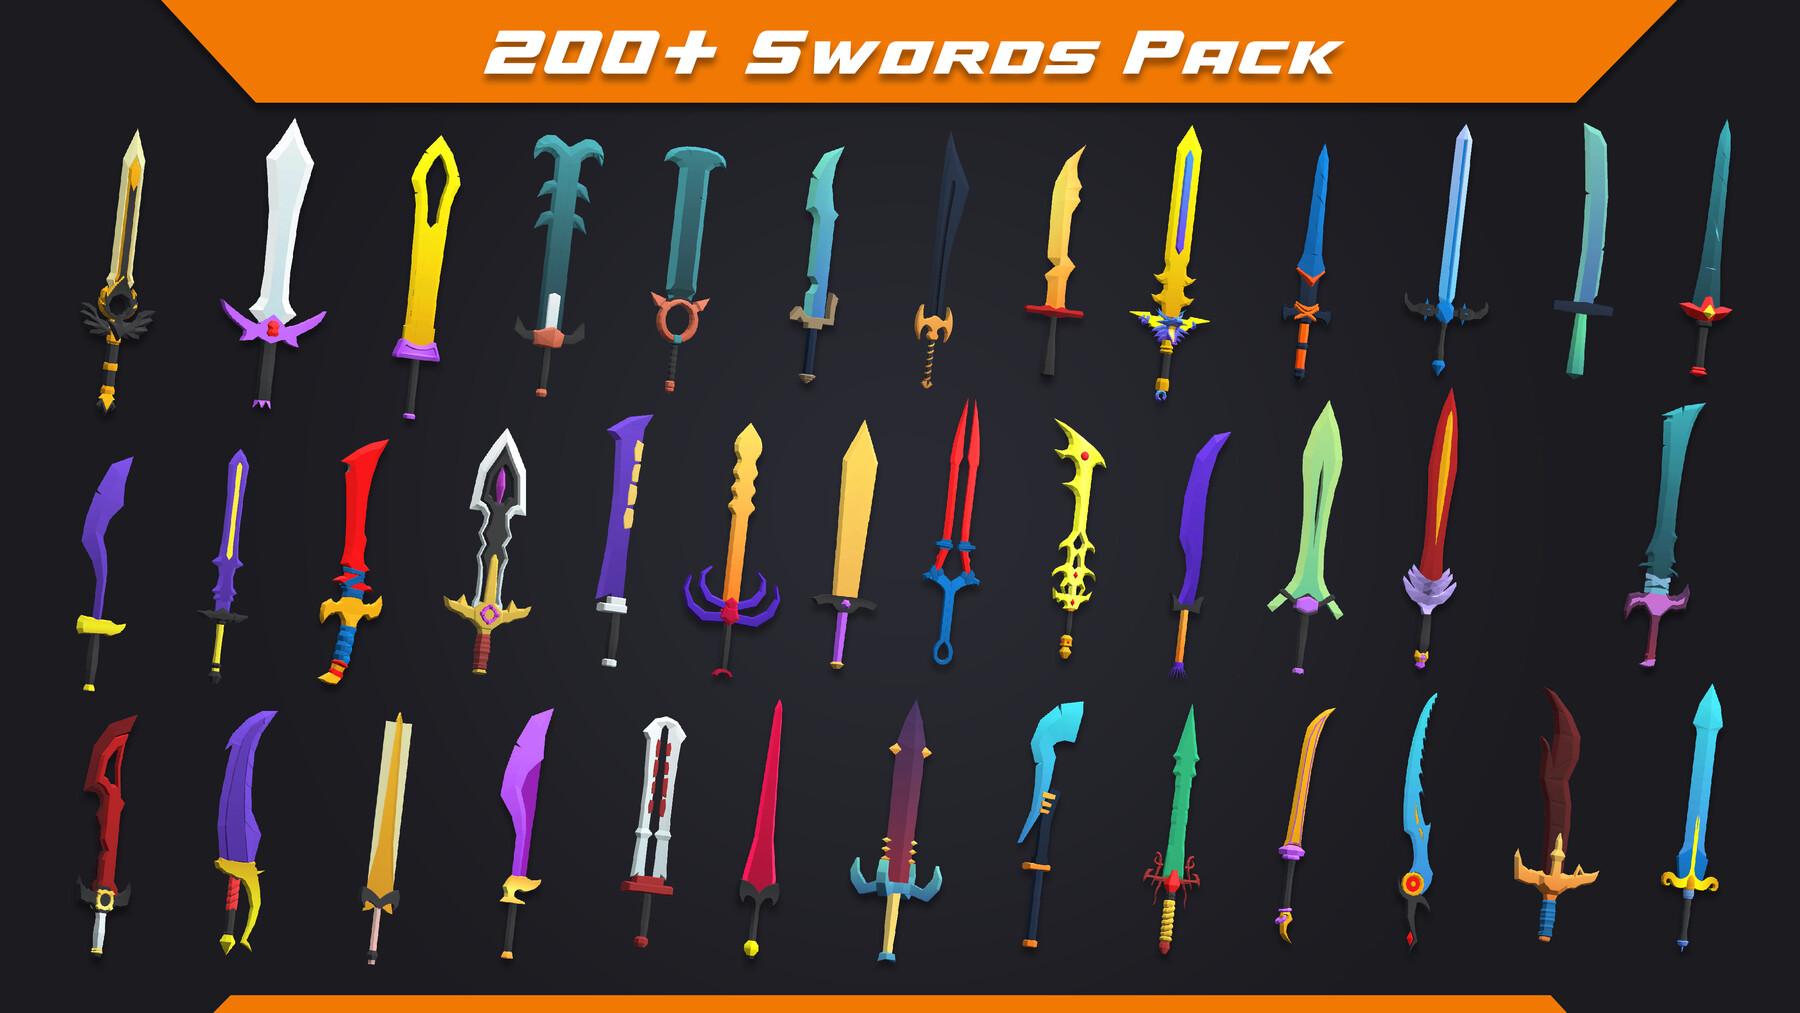 ArtStation - Swords Pack - Stylized Low Poly | Game Assets